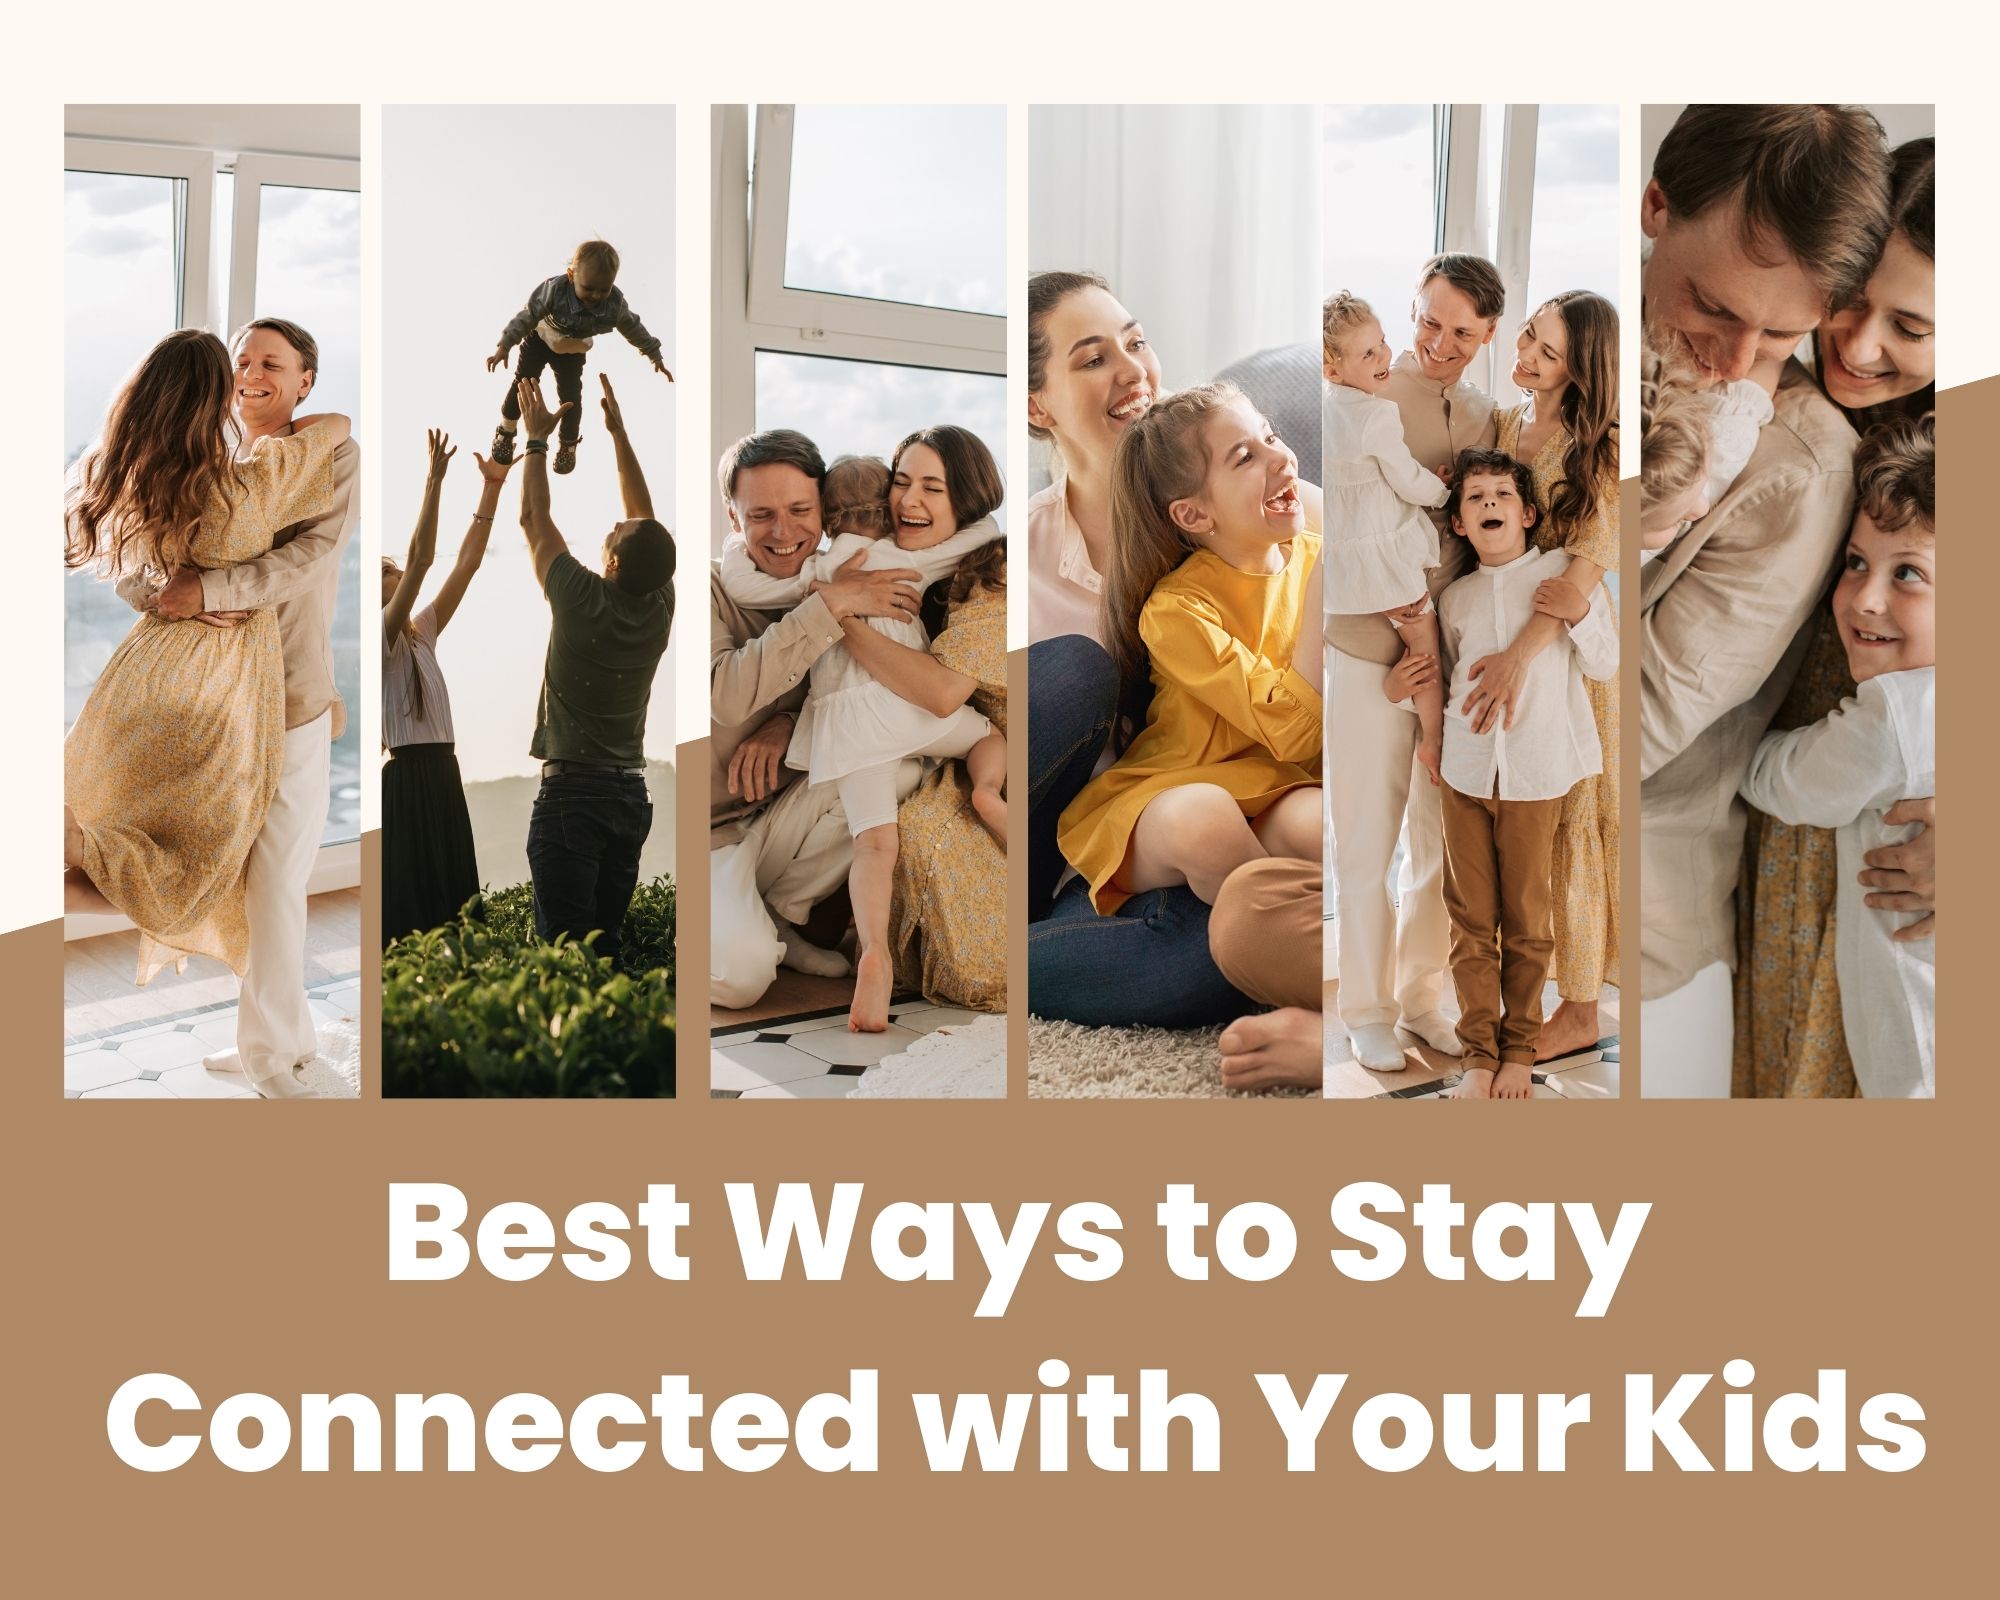 Stay Connected with Your Kids